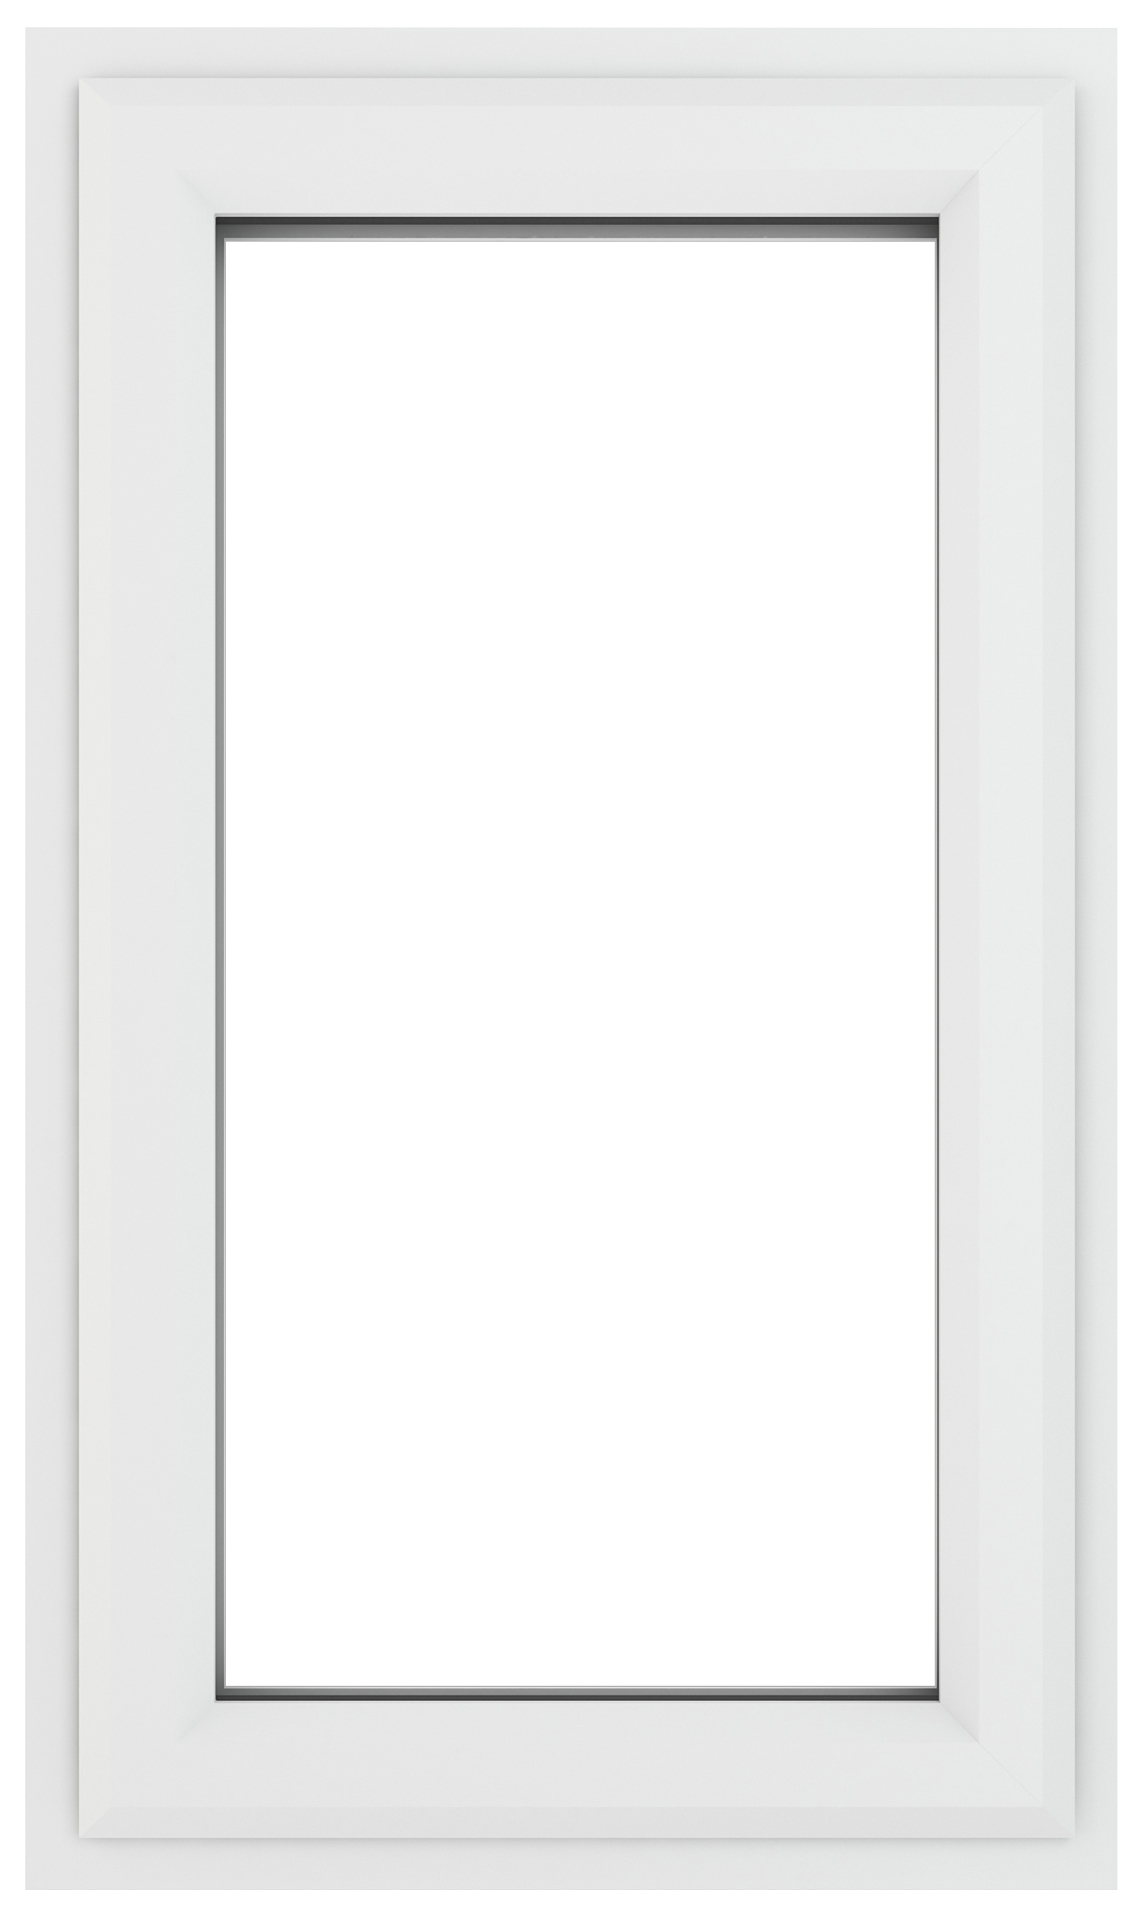 Crystal uPVC White Right Hung Clear Triple Glazed Window - 610 x 965mm